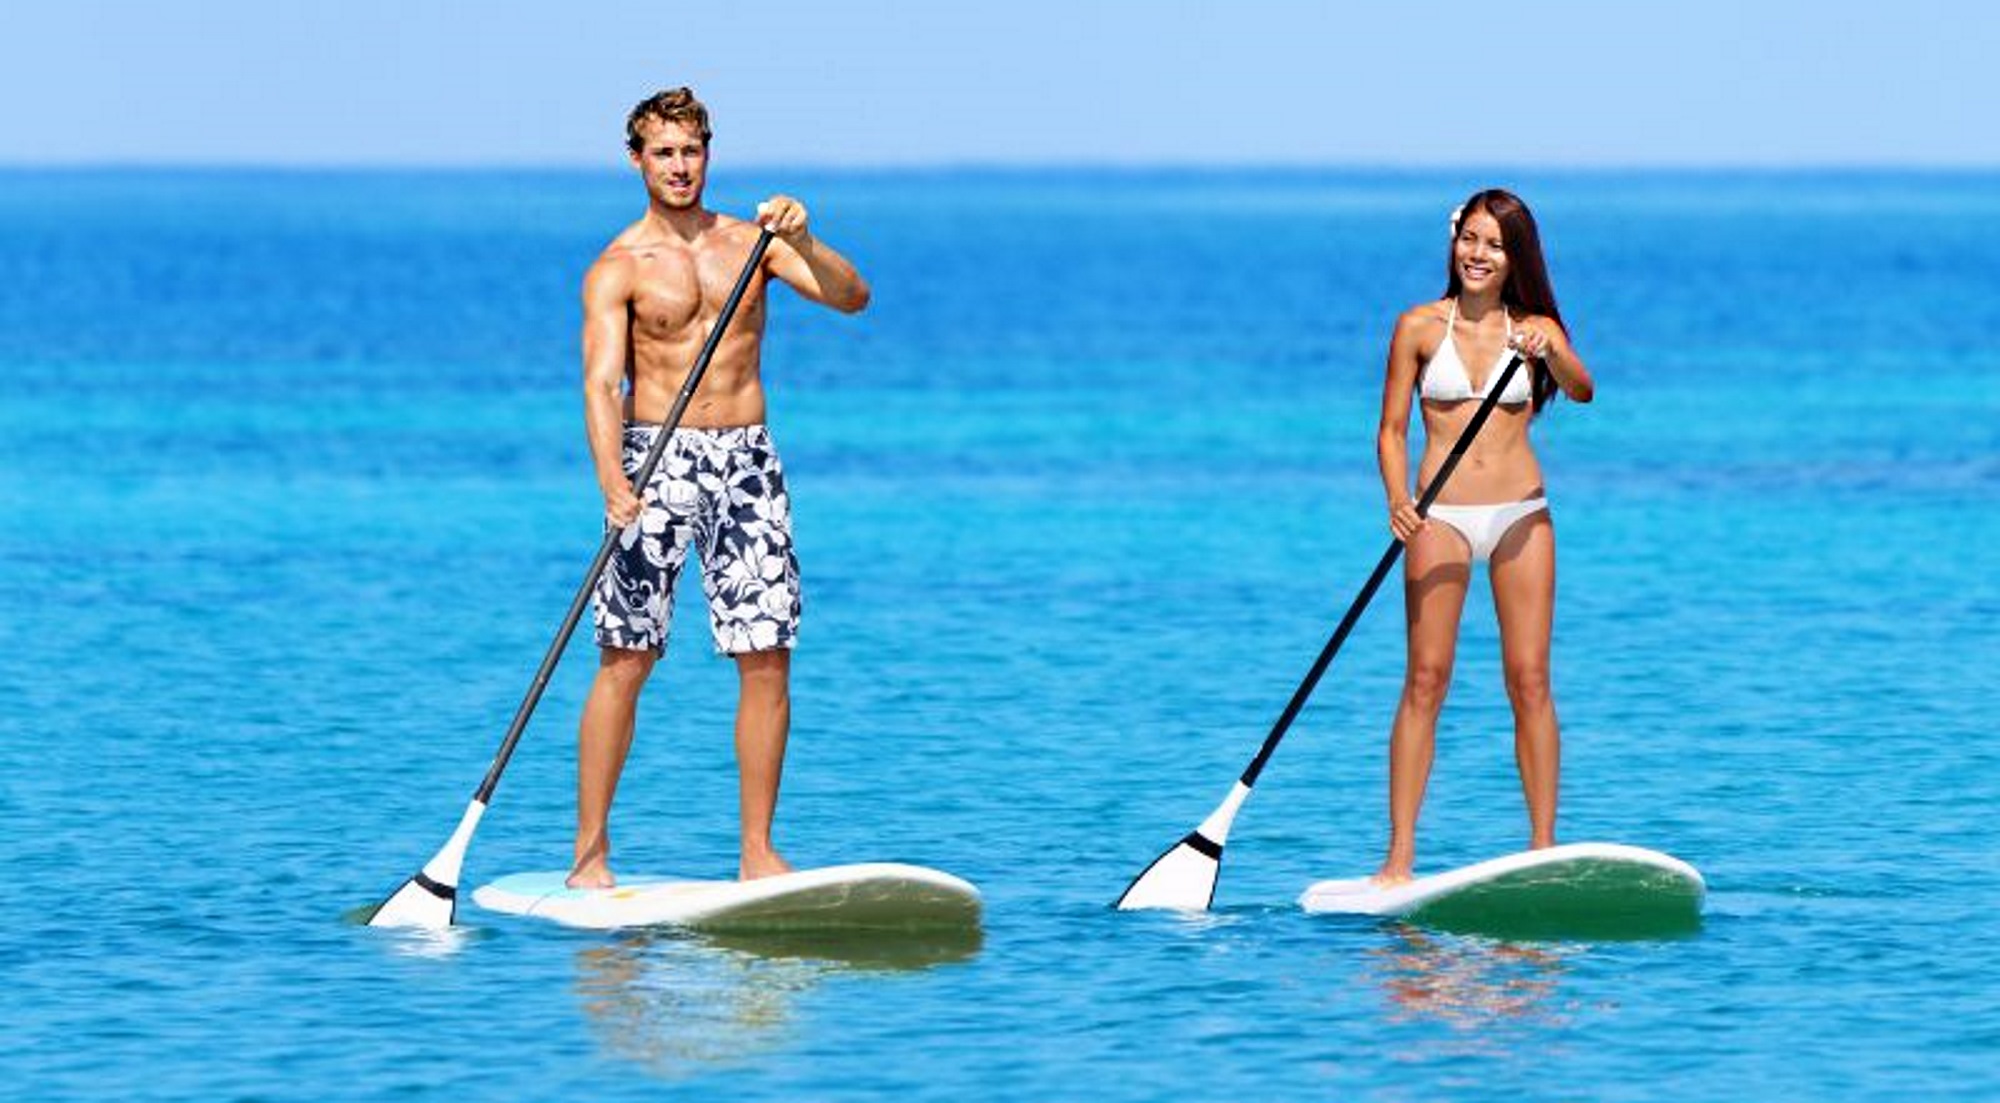 A couple enjoying the watersport of stand-up paddle boarding